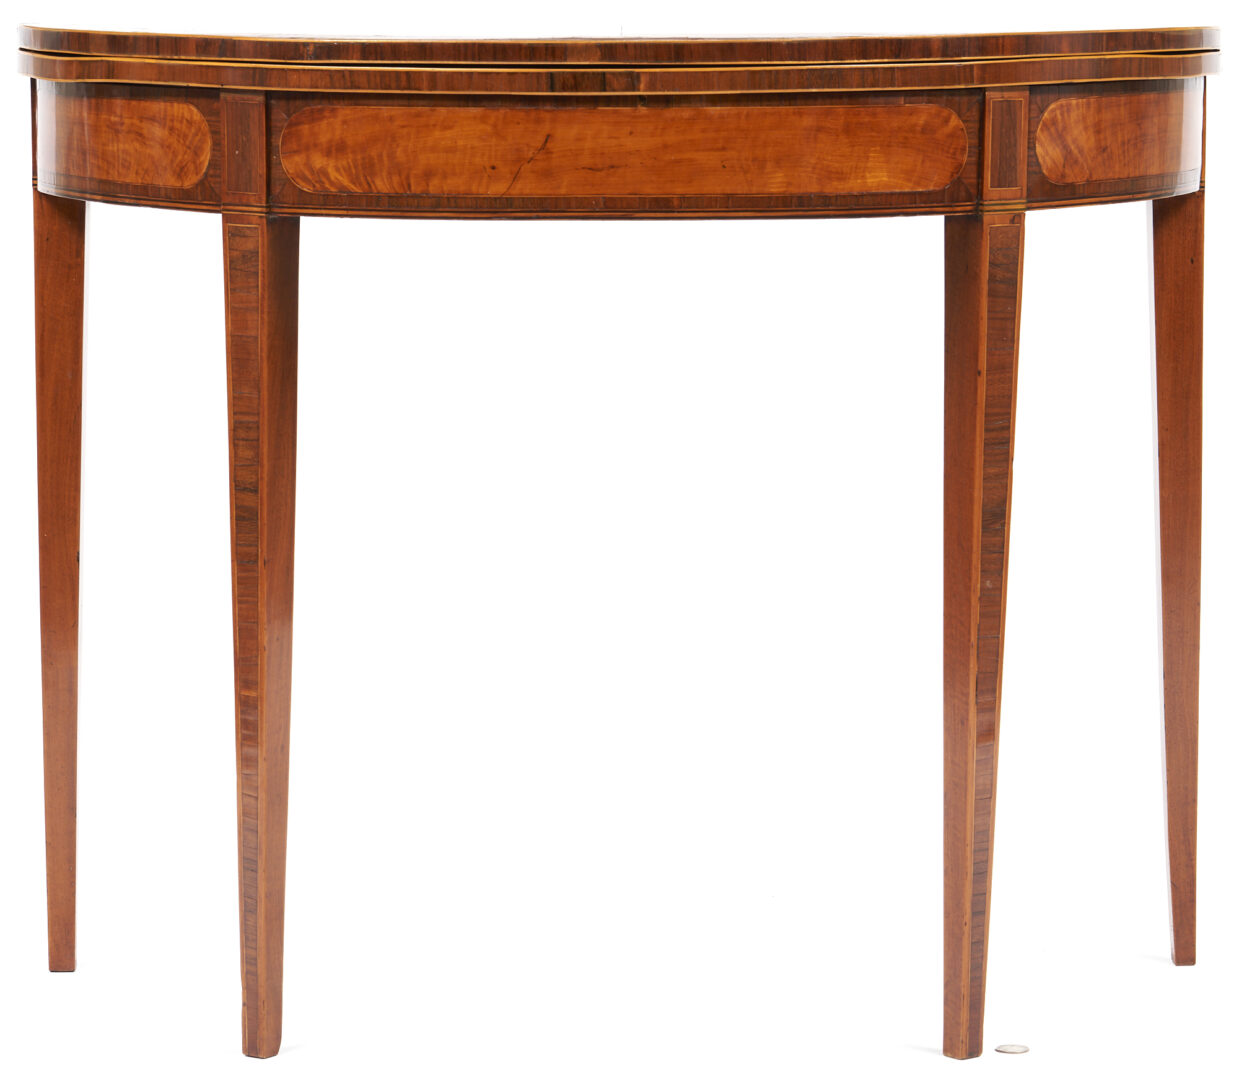 Lot 200: Inlaid and Veneered Demilune Game Table, circa 1800